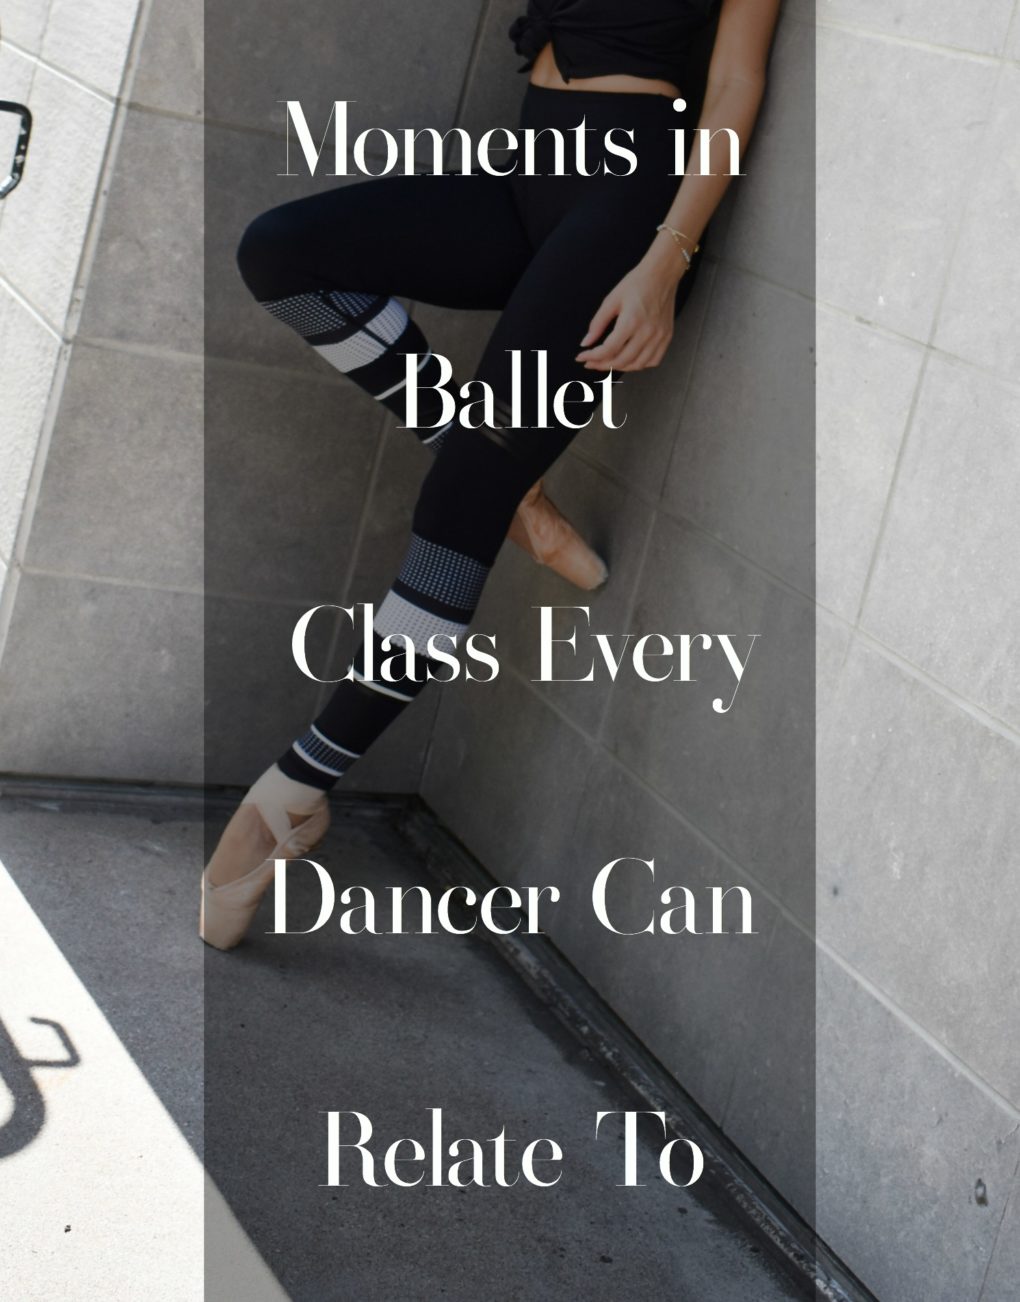 Moments In Ballet Class Every Ballet Dancer Can Relate To / When Old Injuries Come Back to Haunt You